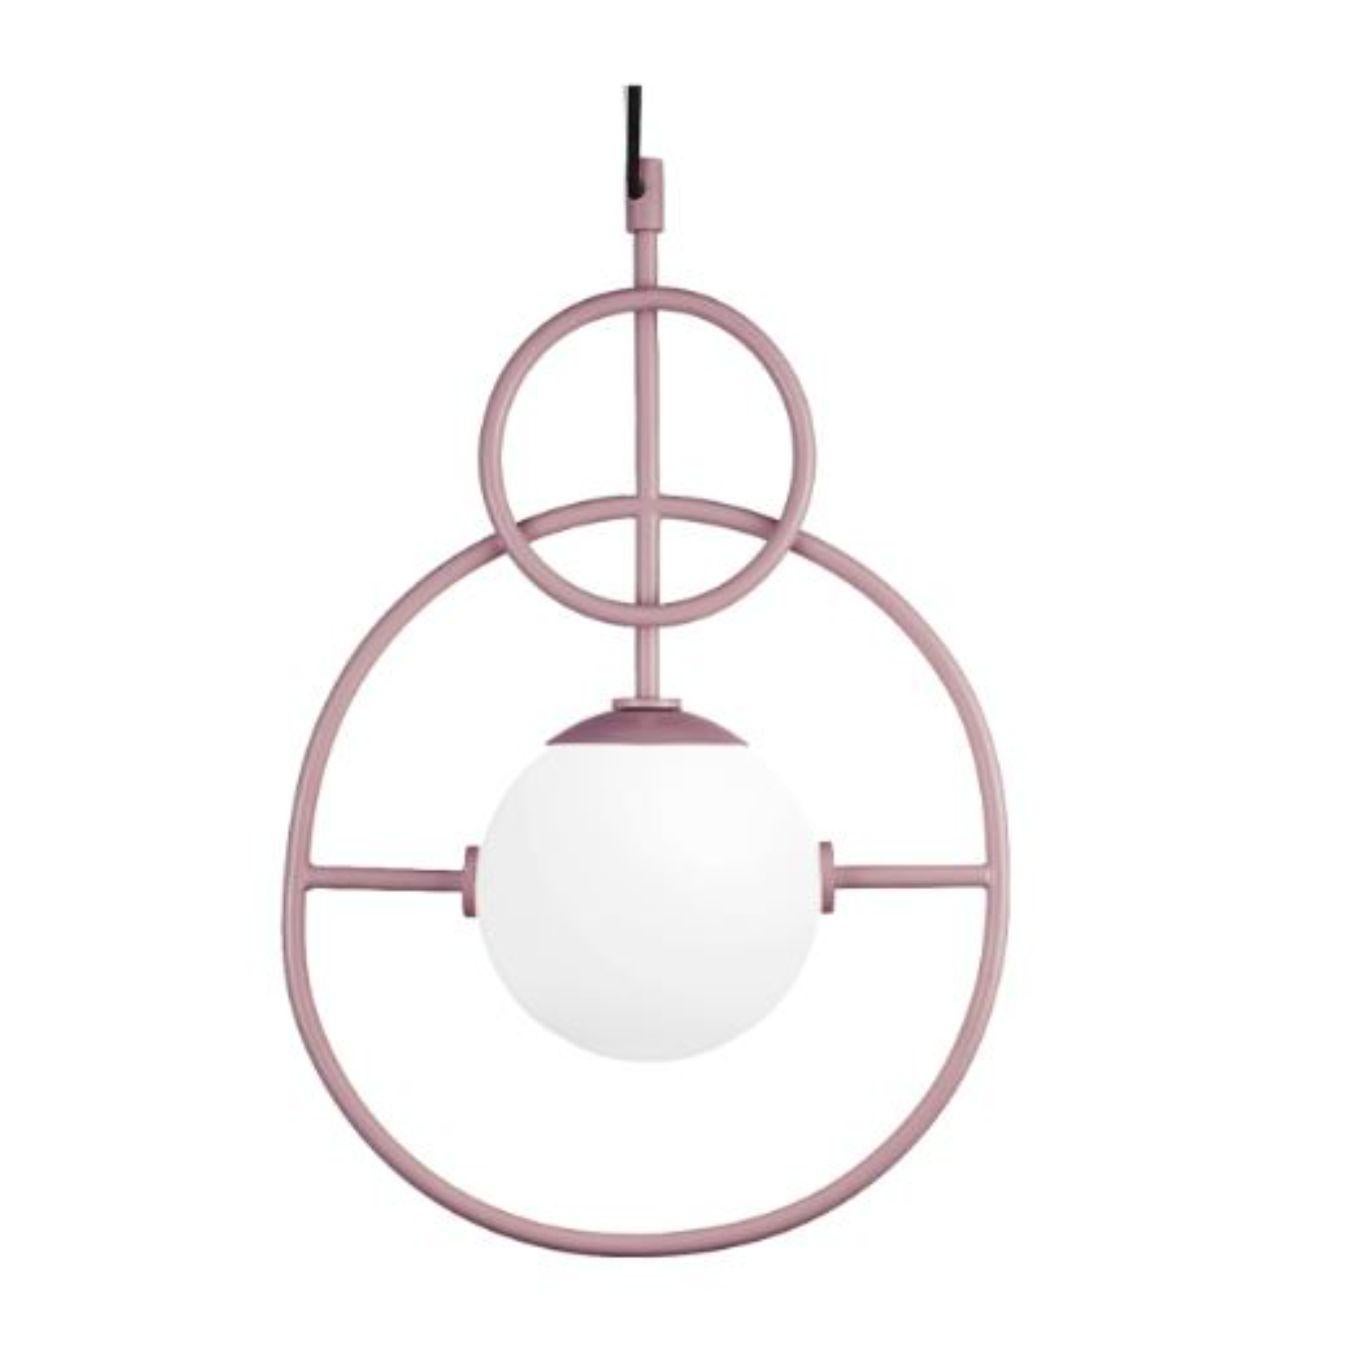 Lilac Loop II suspension lamp by Dooq
Dimensions: W 31 x D 15 x H 47 cm
Materials: lacquered metal, polished or brushed metal.
Also available in different colours and materials.

Information:
230V/50Hz
1 x max. G9
4W LED

120V/60Hz
1 x